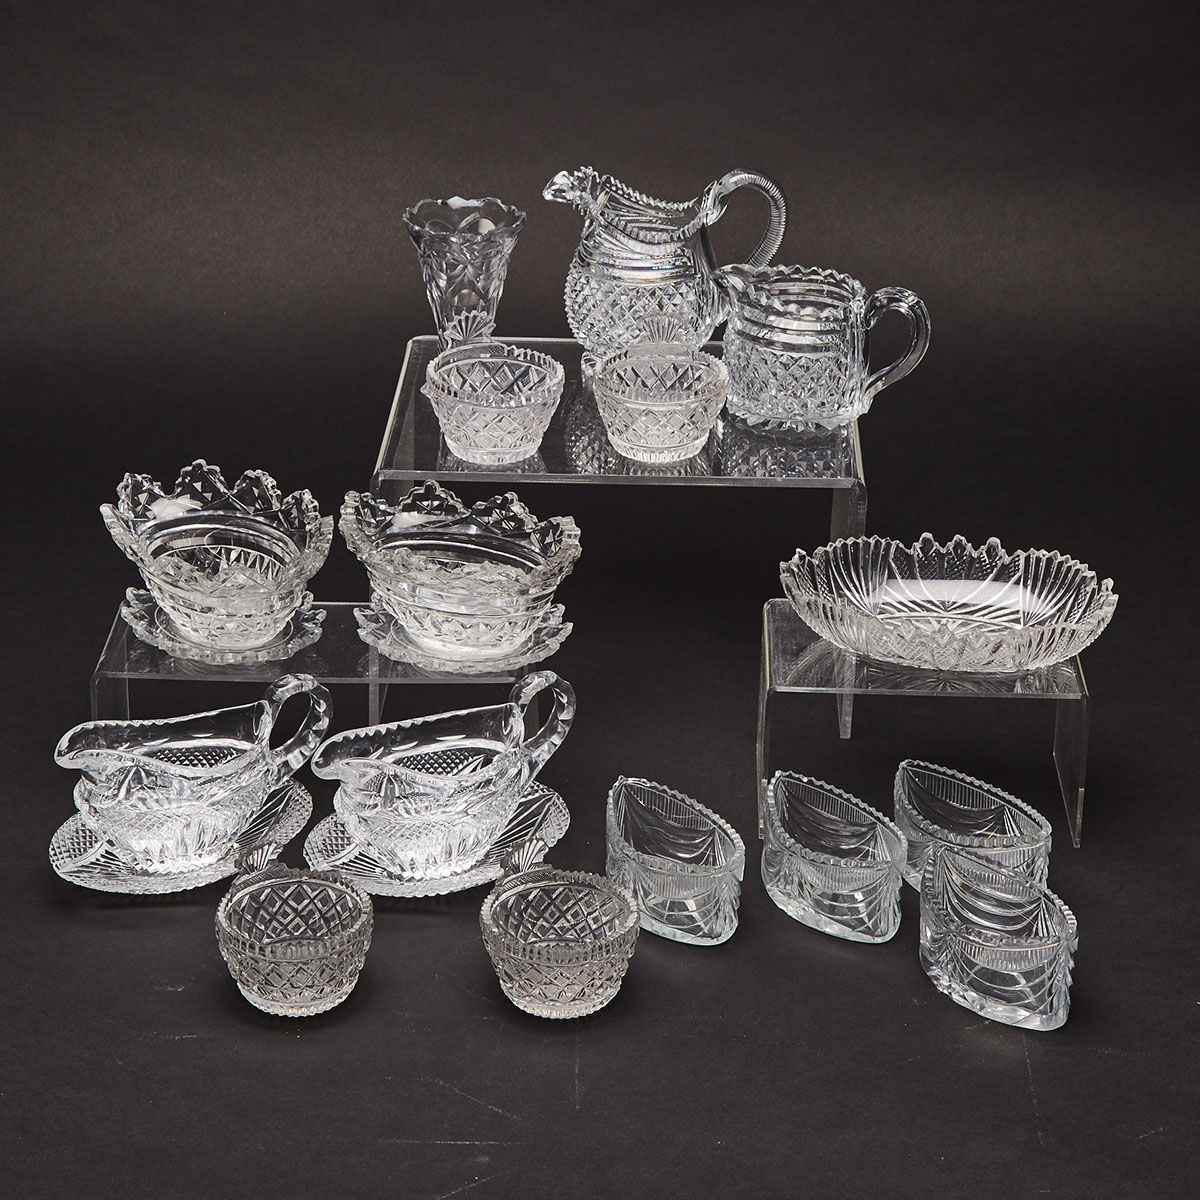 Group of Anglo-Irish Cut Glass, late 18th/19th century